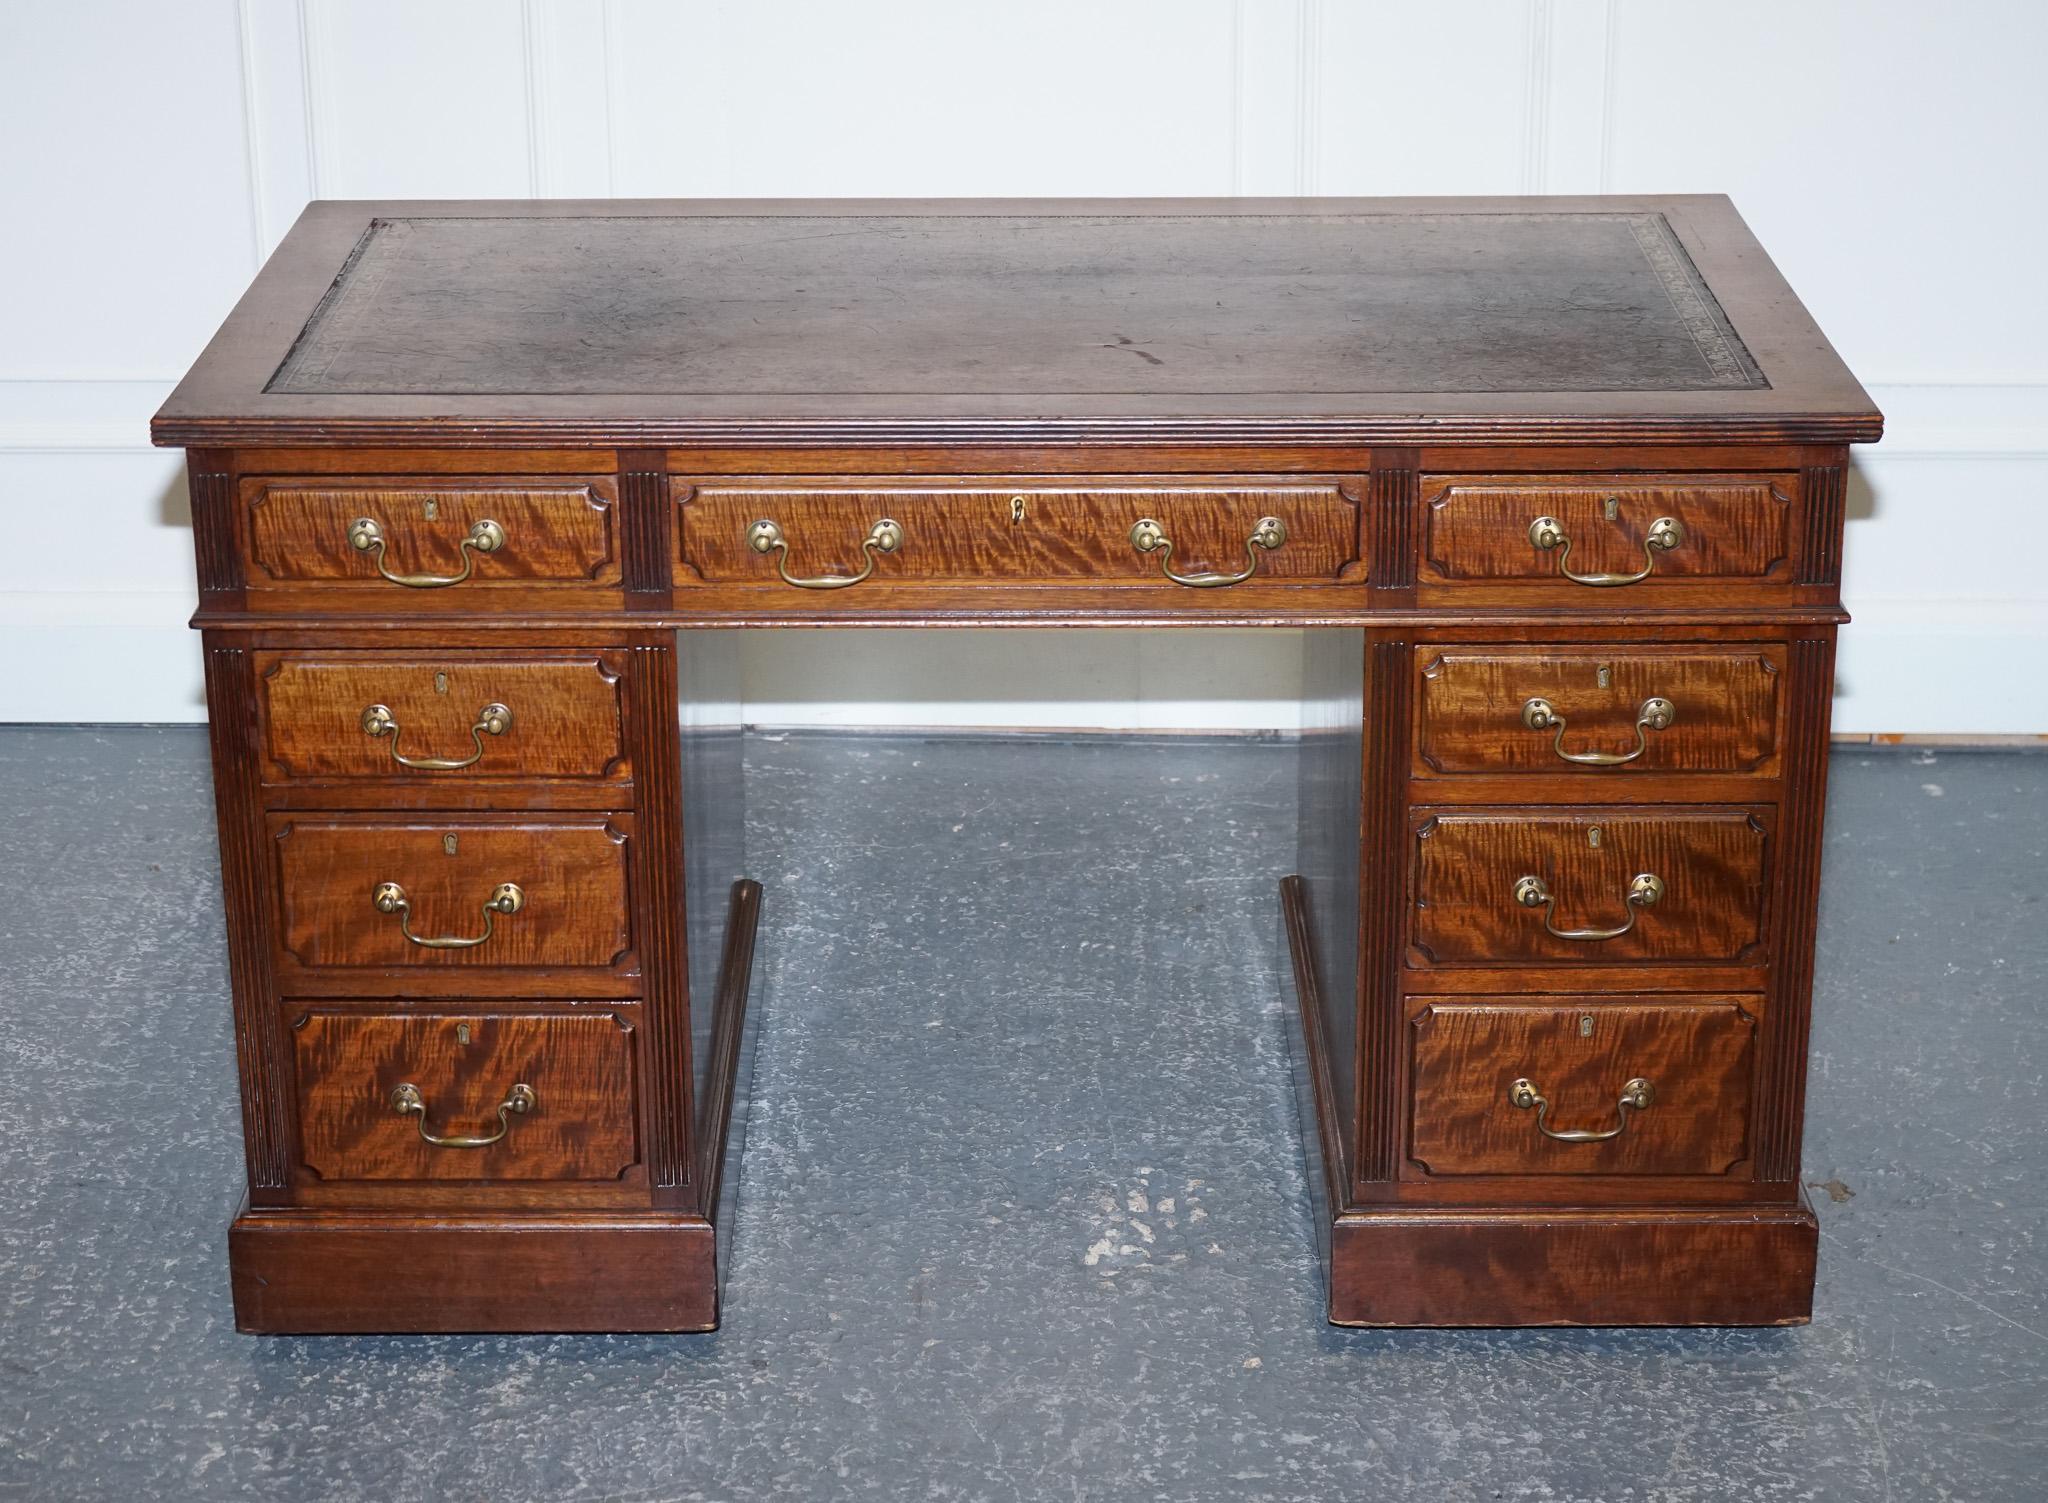 We are delighted to offer for sale this Lovely Edwardian Maple & Co Pedestal Desk With an Embossed Brown Leather Top.

The Edwardian Maple & Co Pedestal Writing Desk is a stunning piece of furniture with a classic, timeless design. 
Its